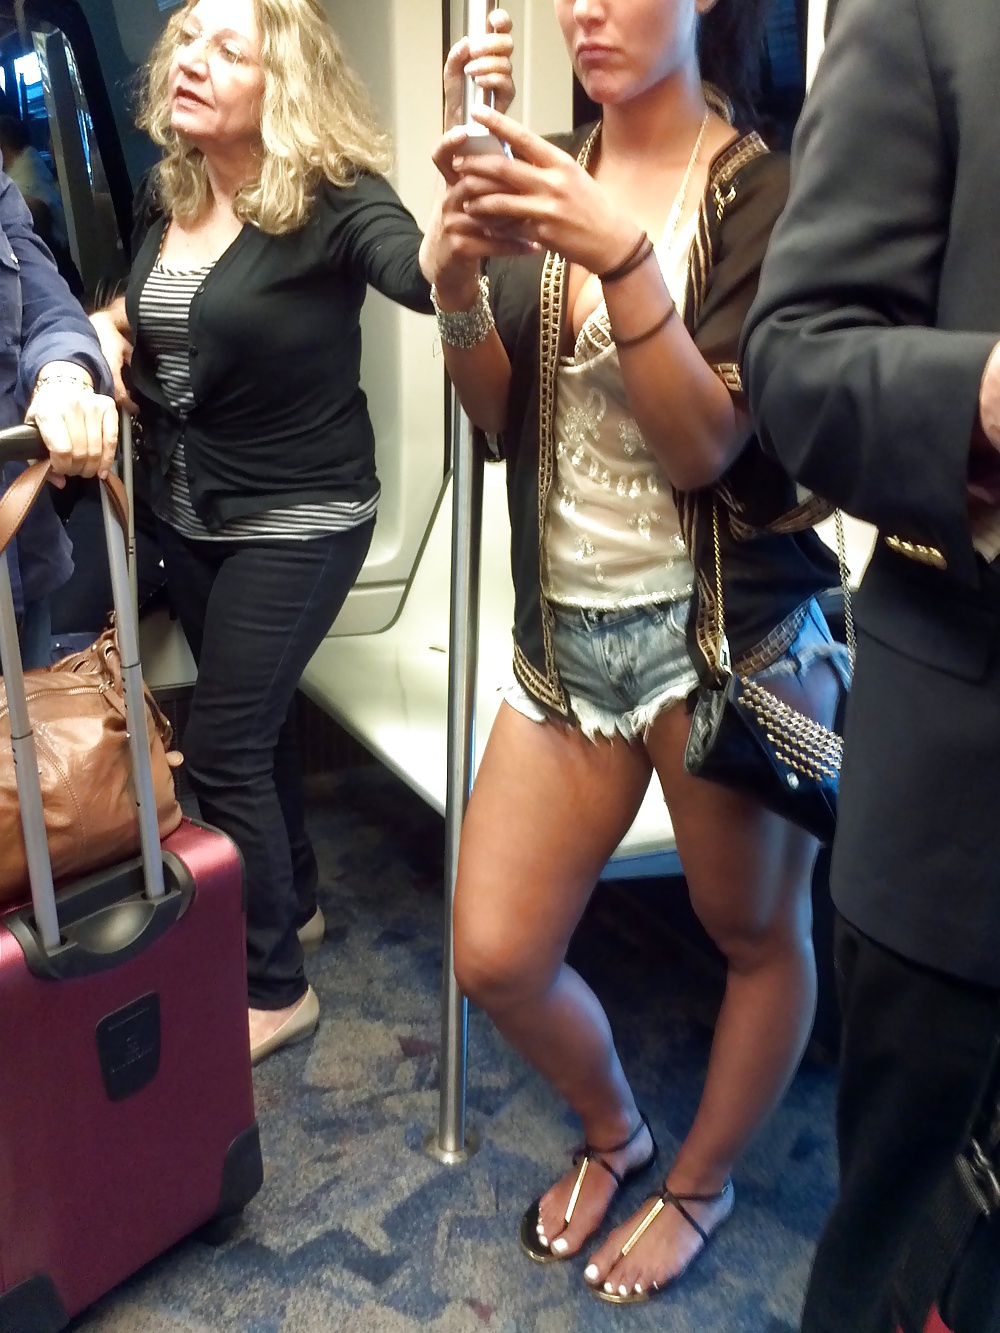 Dirty Teen Slut On Train porn pictures